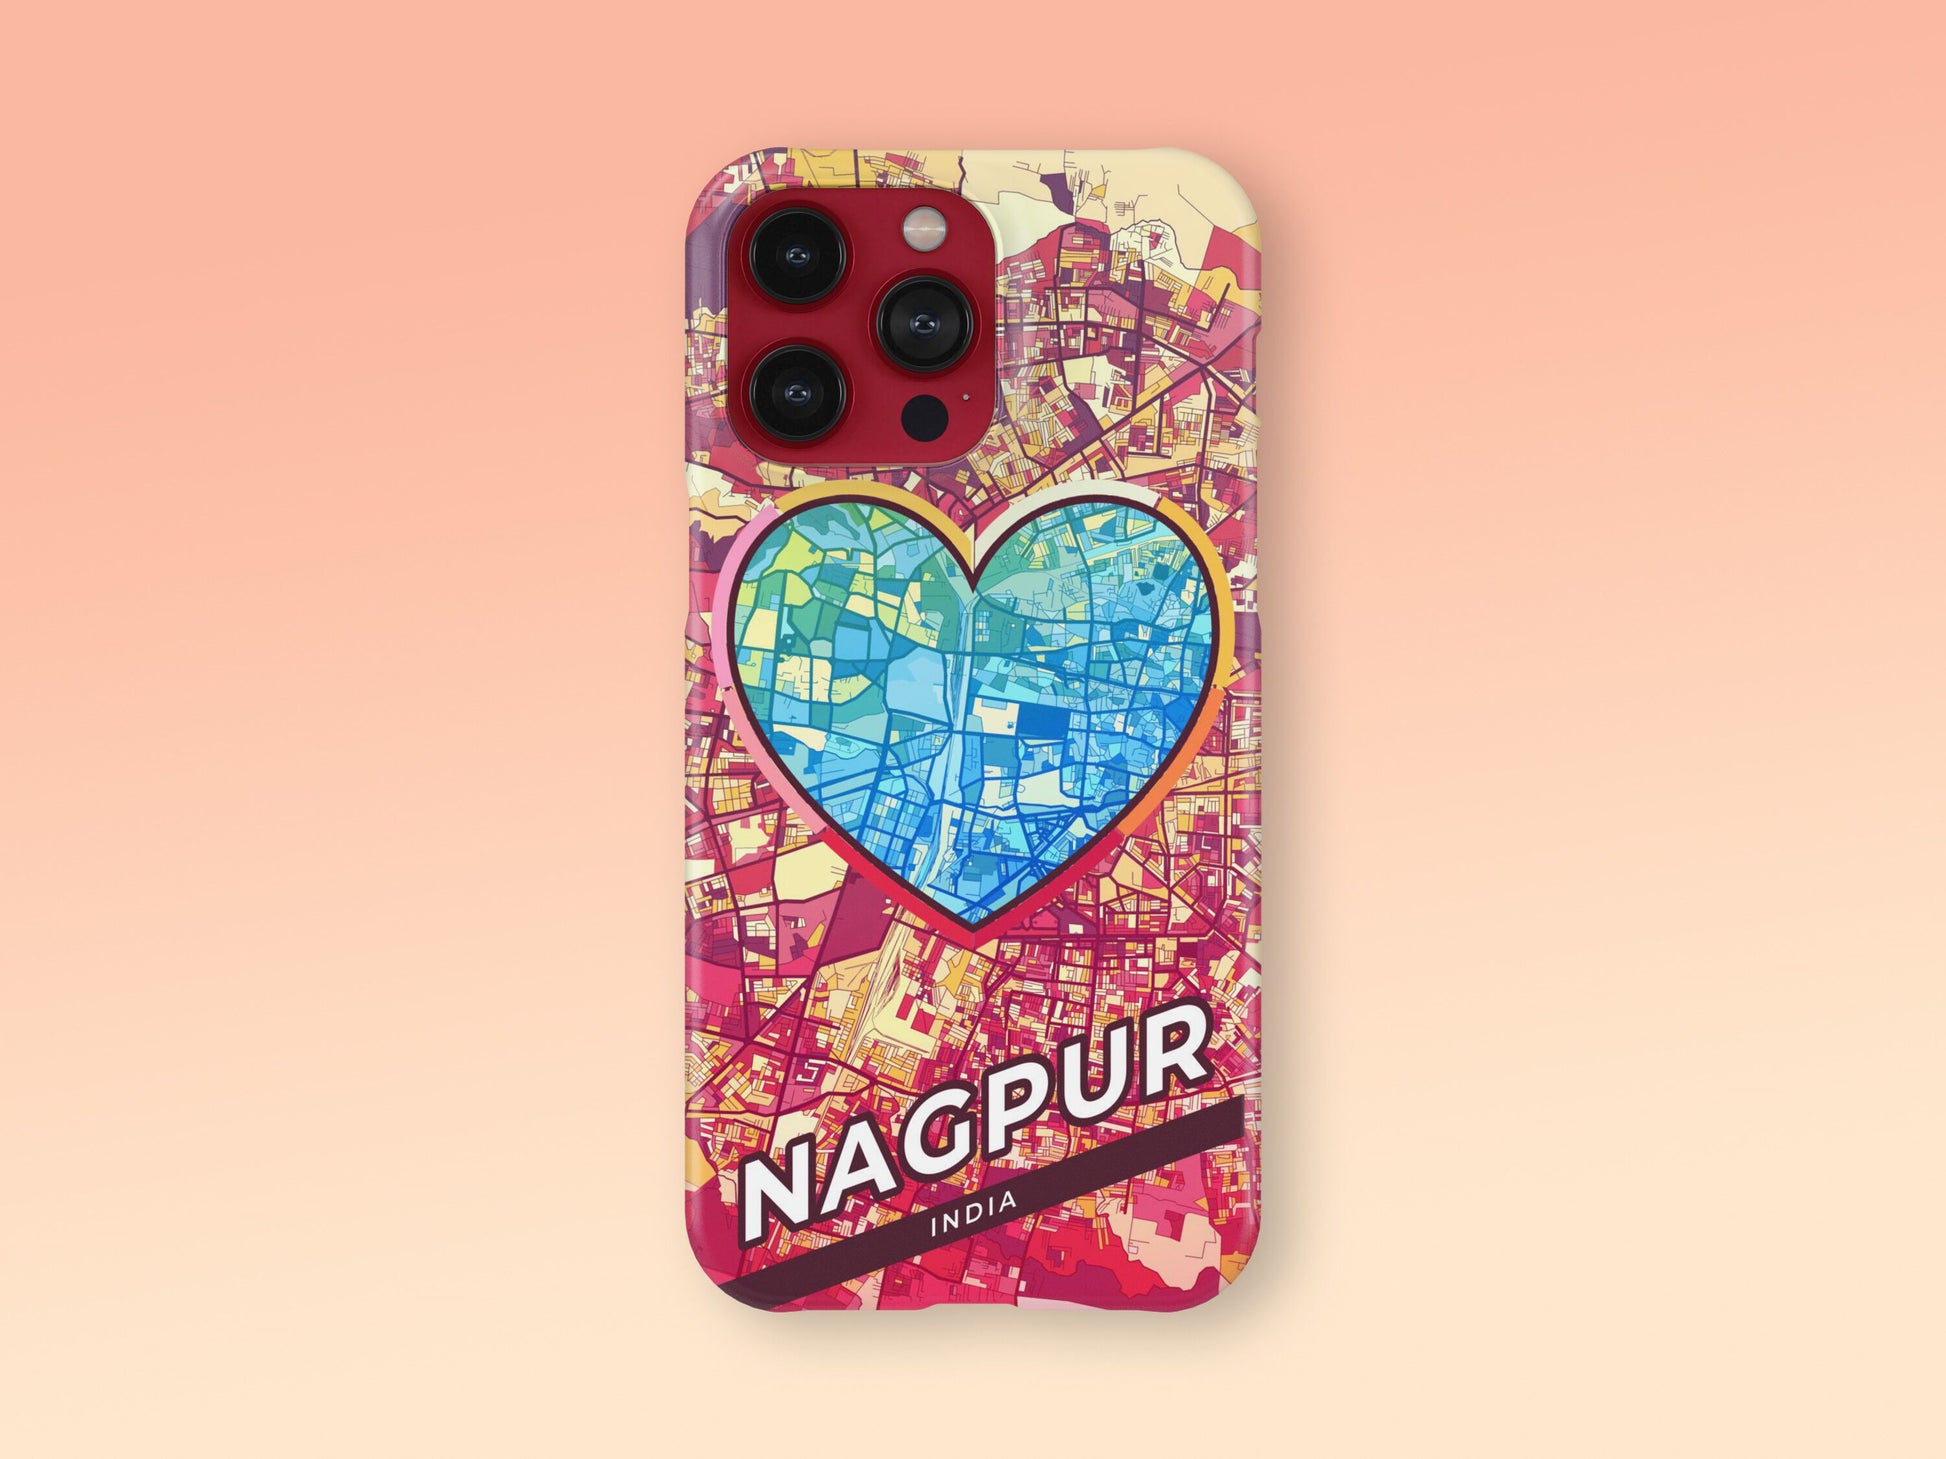 Nagpur India slim phone case with colorful icon 2